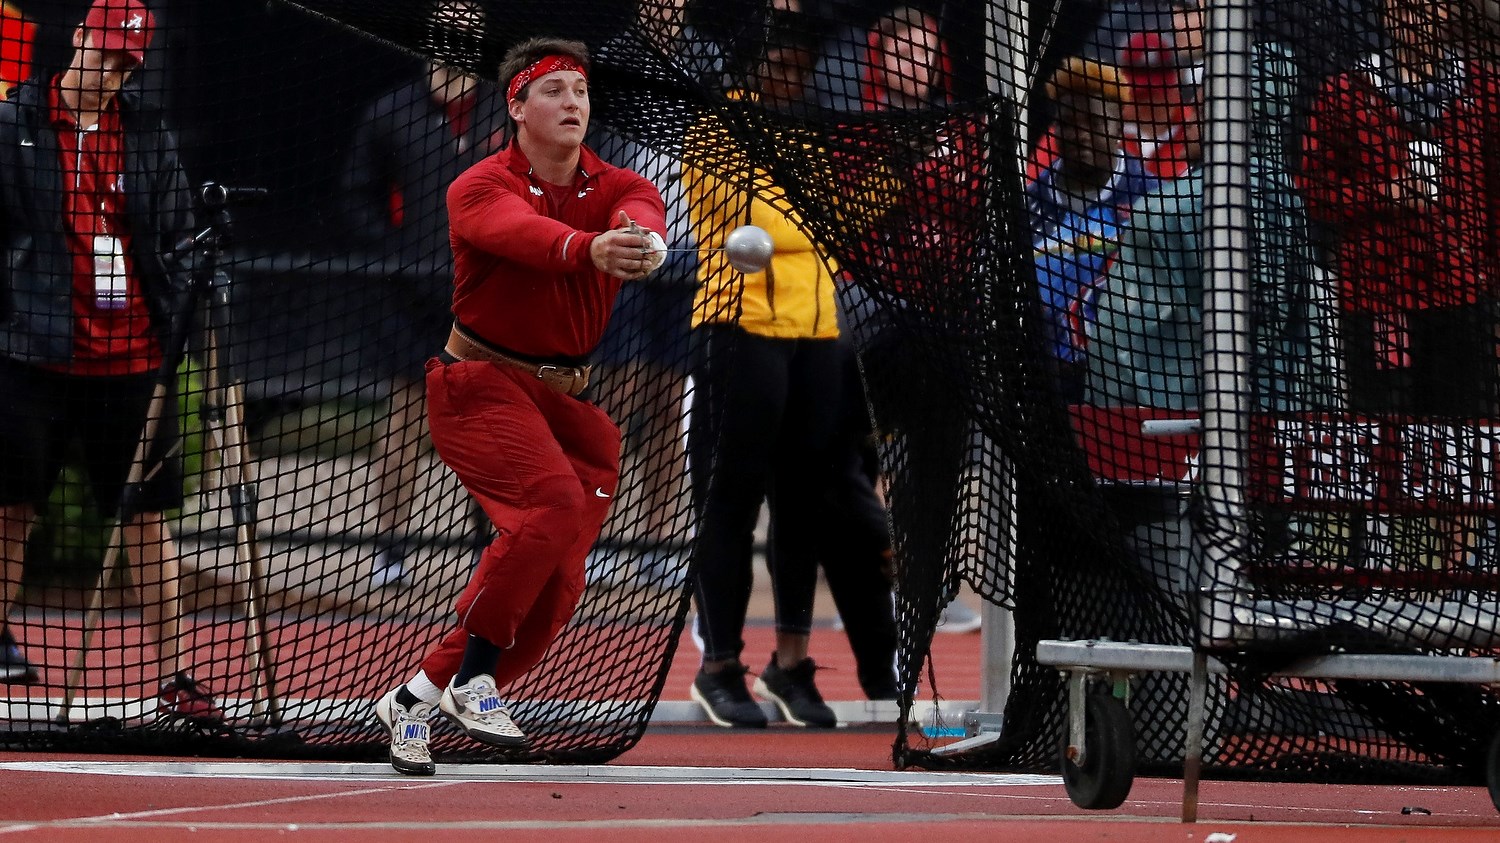 Daniel Haugh throws a hammer during the hammer throw in a field event for his college.